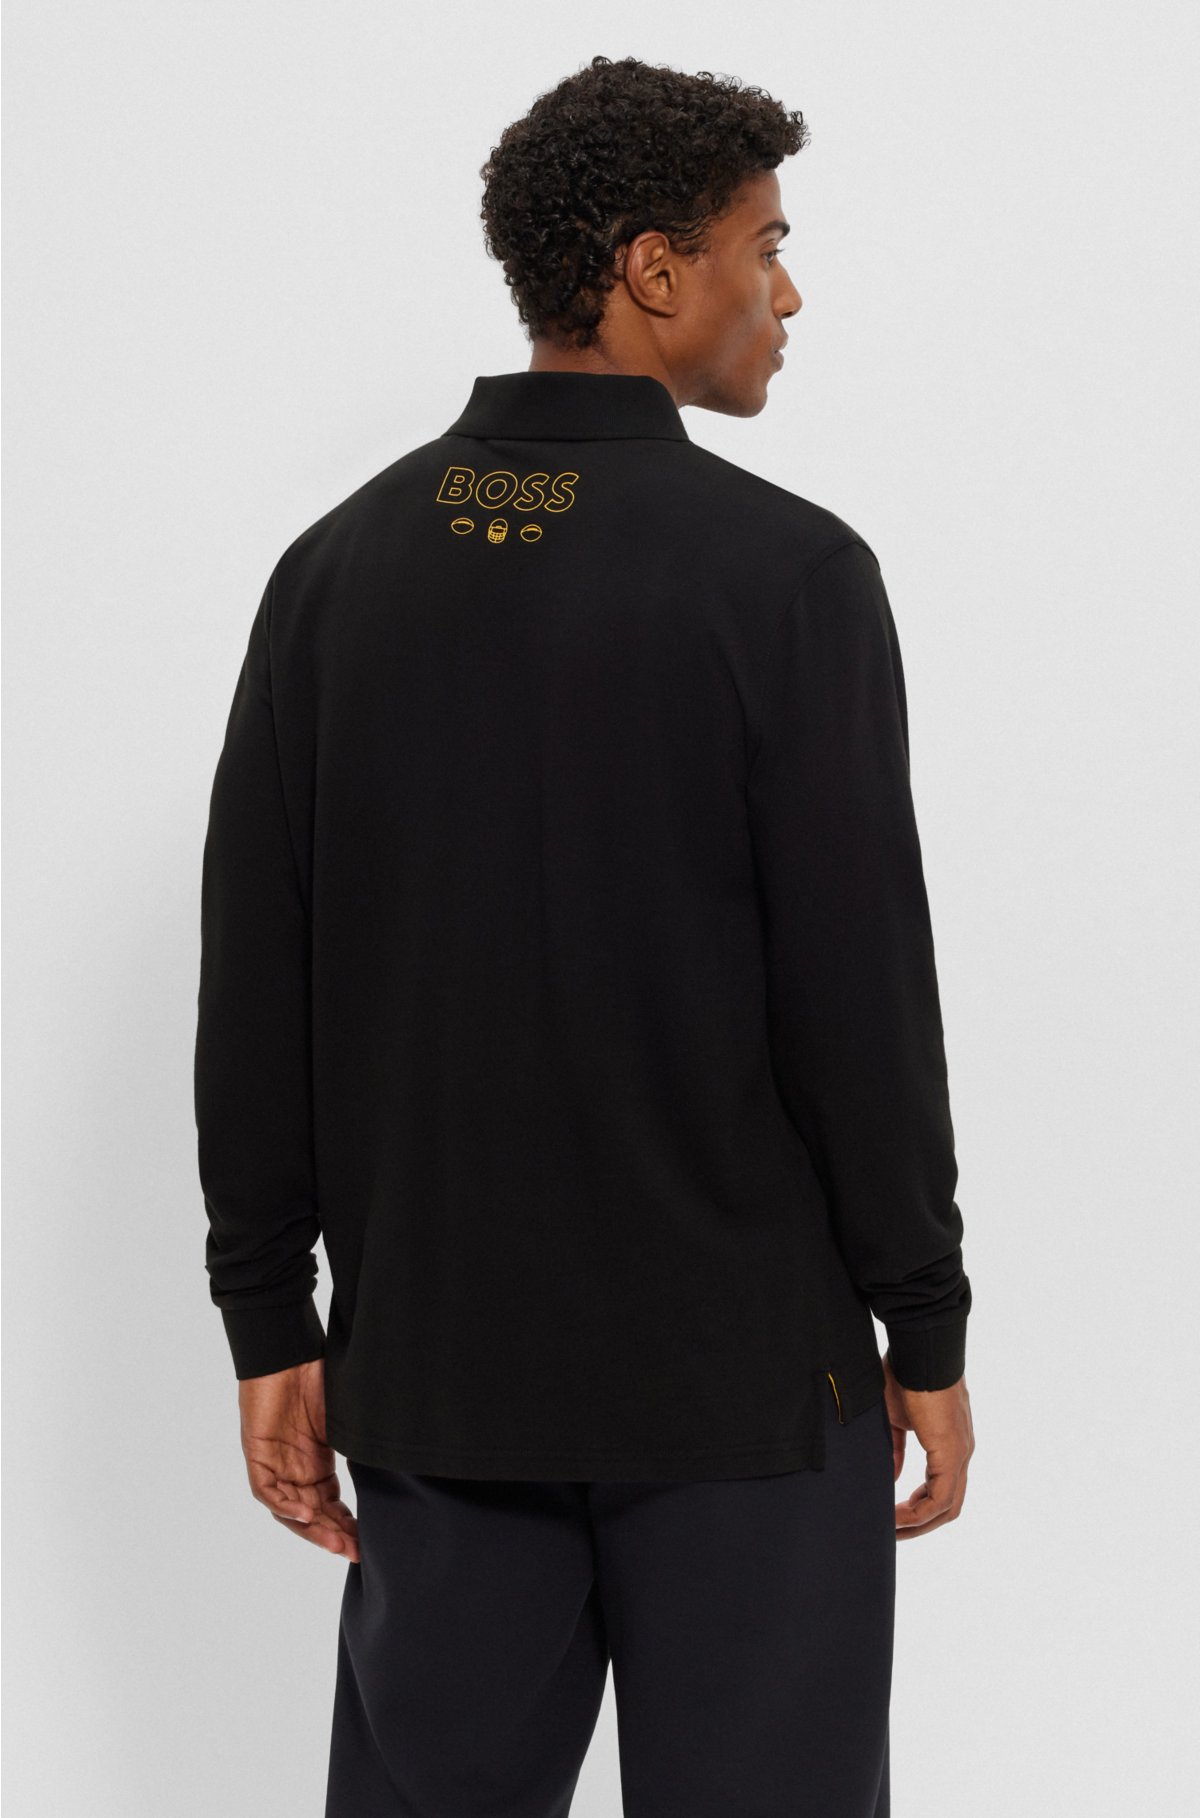 BOSS x NFL long-sleeved polo shirt with collaborative branding, Steelers